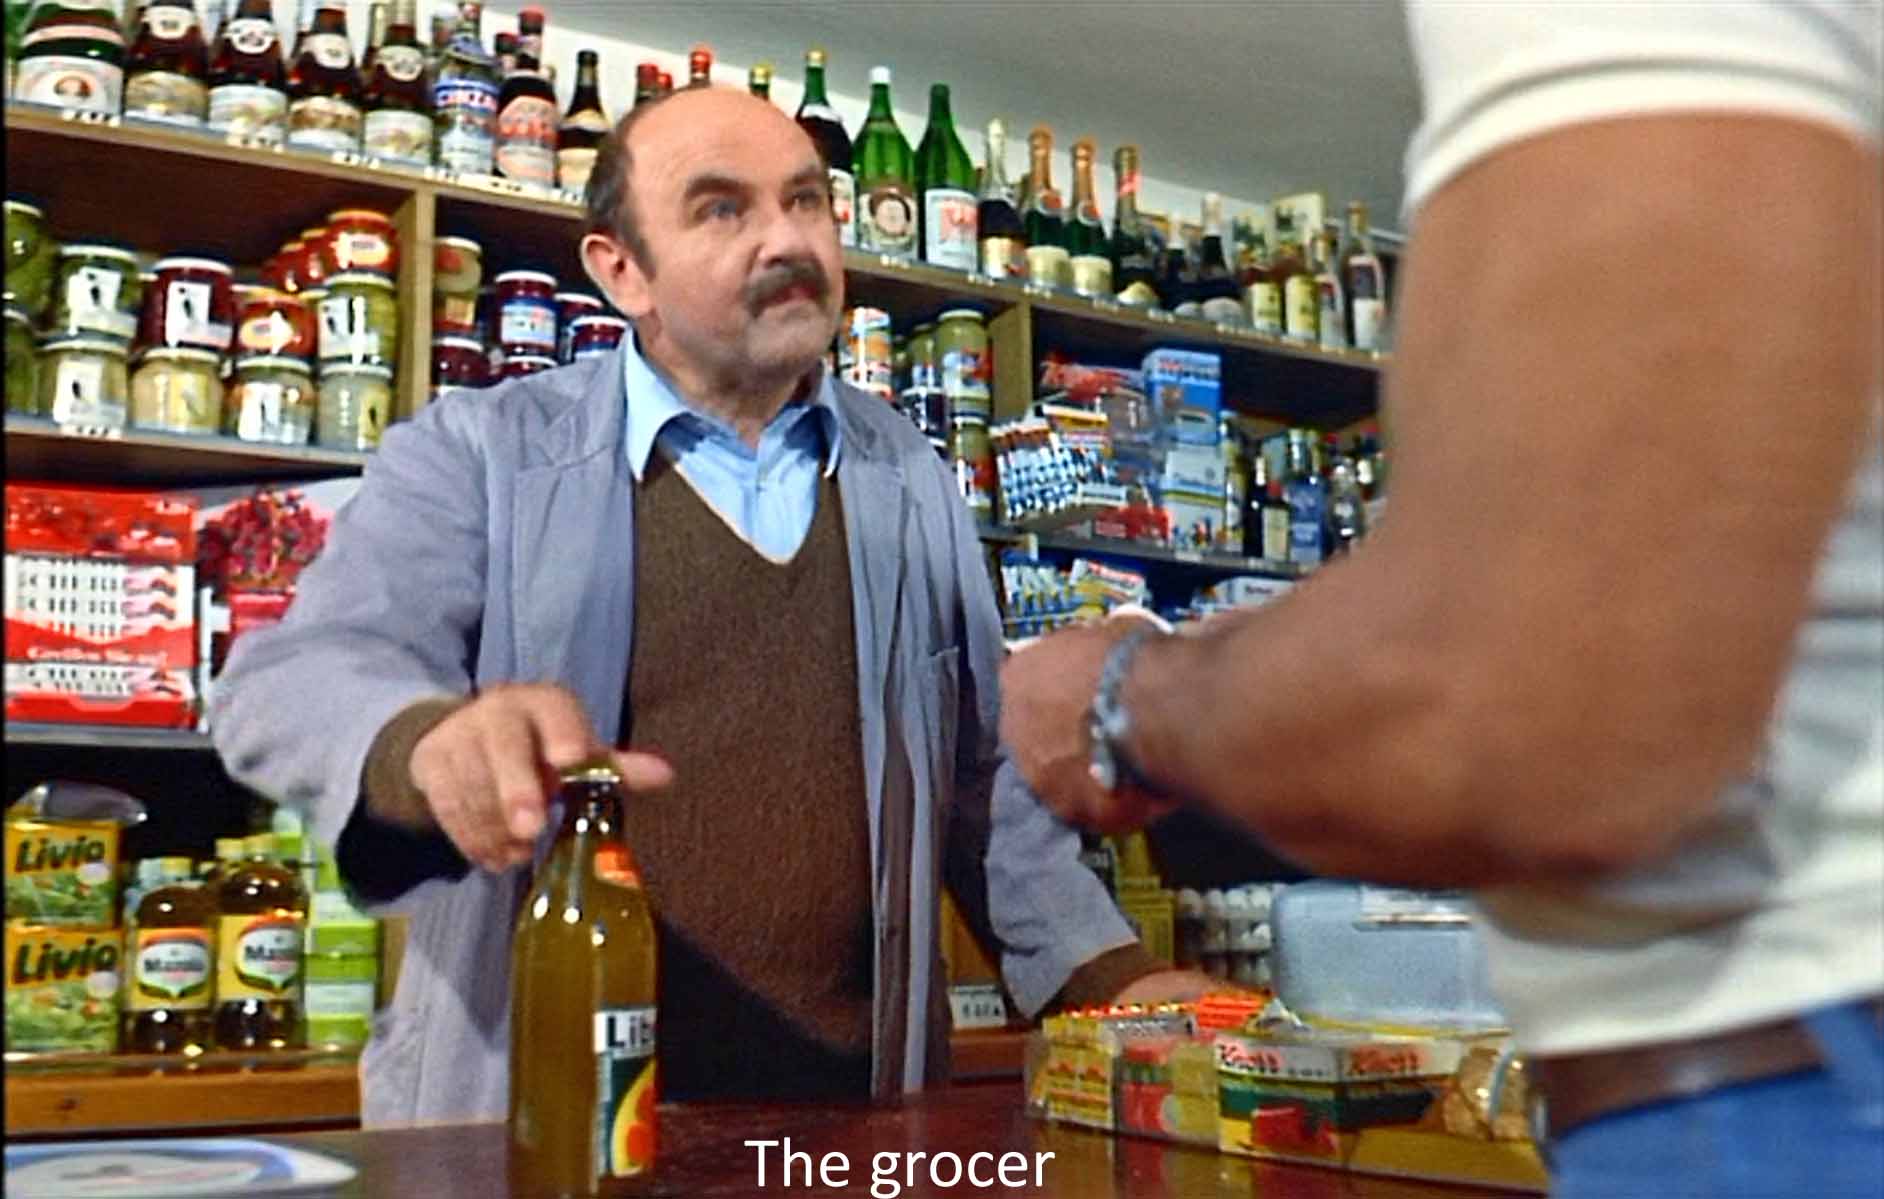 The grocer